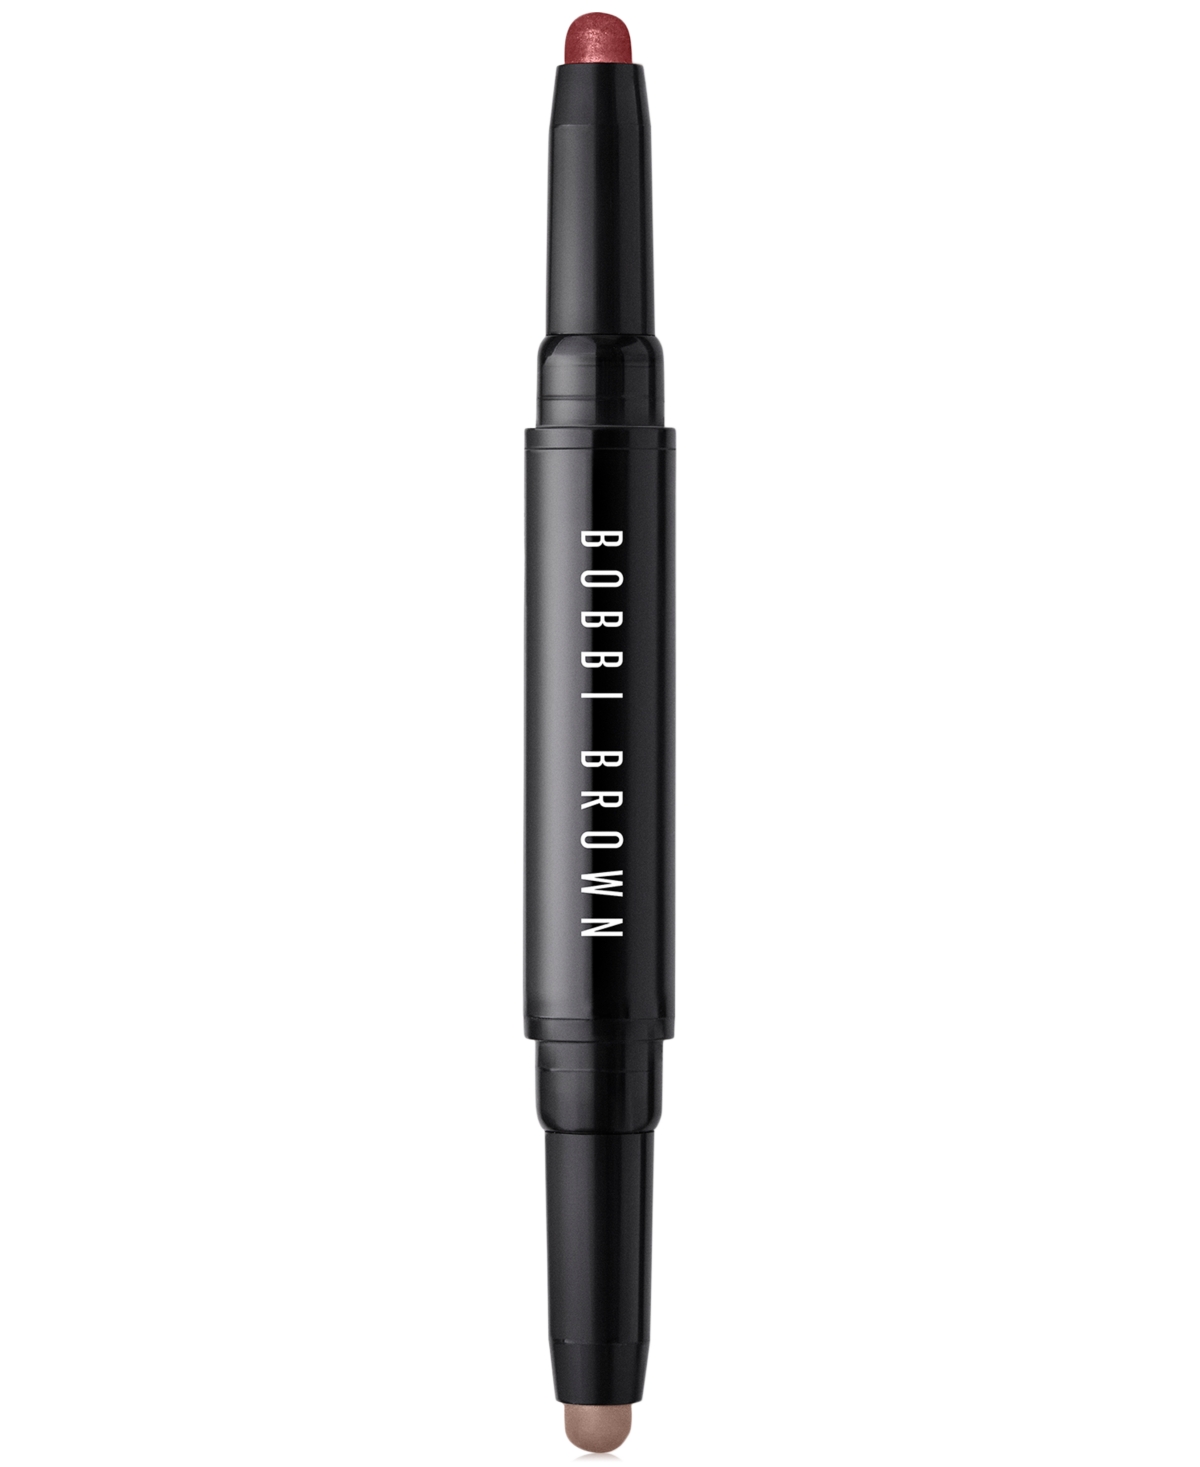 Bobbi Brown Dual-ended Long-wear Cream Shadow Stick In Bronze Pink Espresso